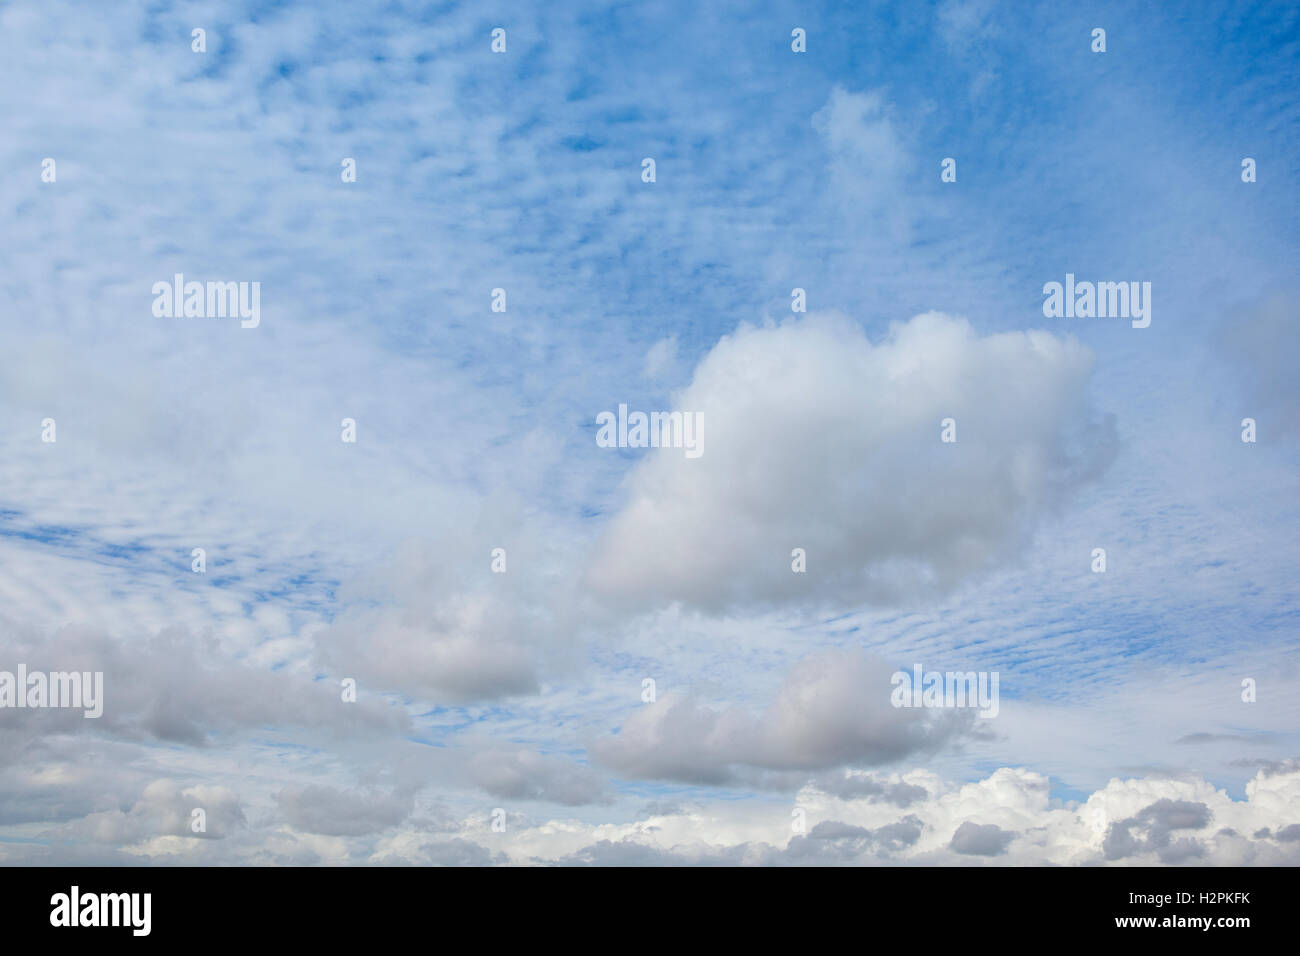 Natural patterns and texture of cloud formations in a blue sky Stock Photo